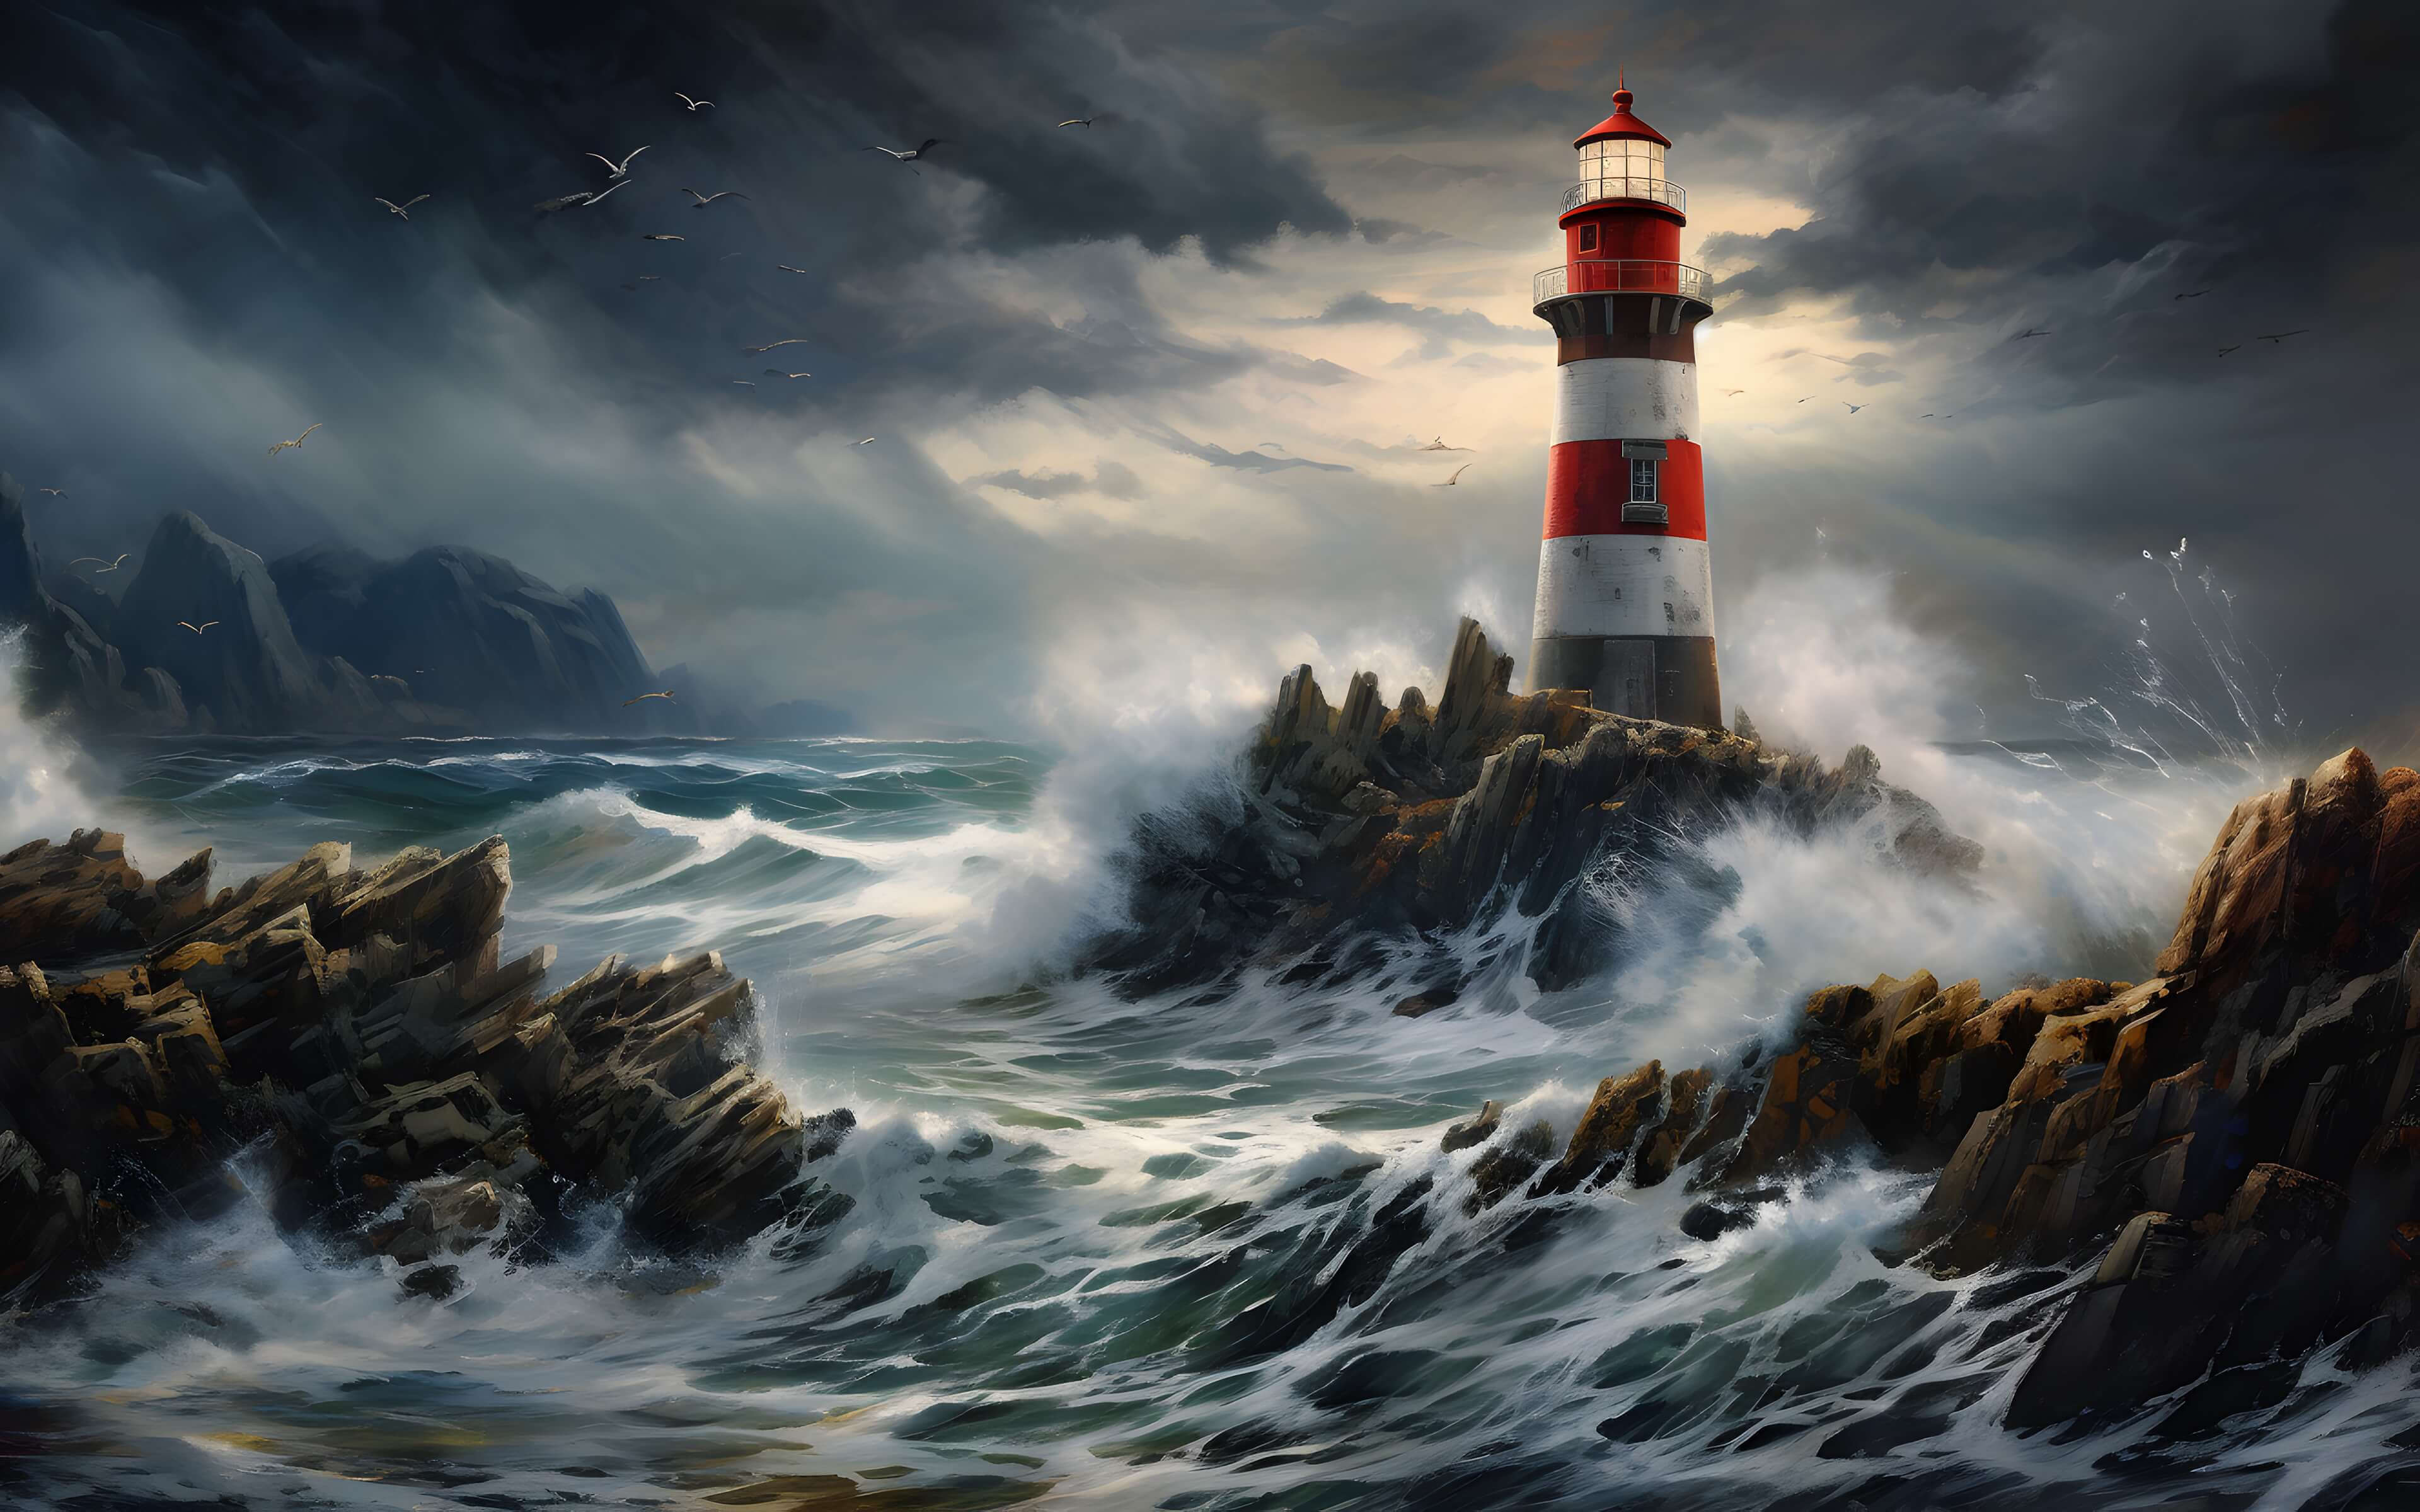 Lighthouse in the ocean waves wallpaper 3840x2400